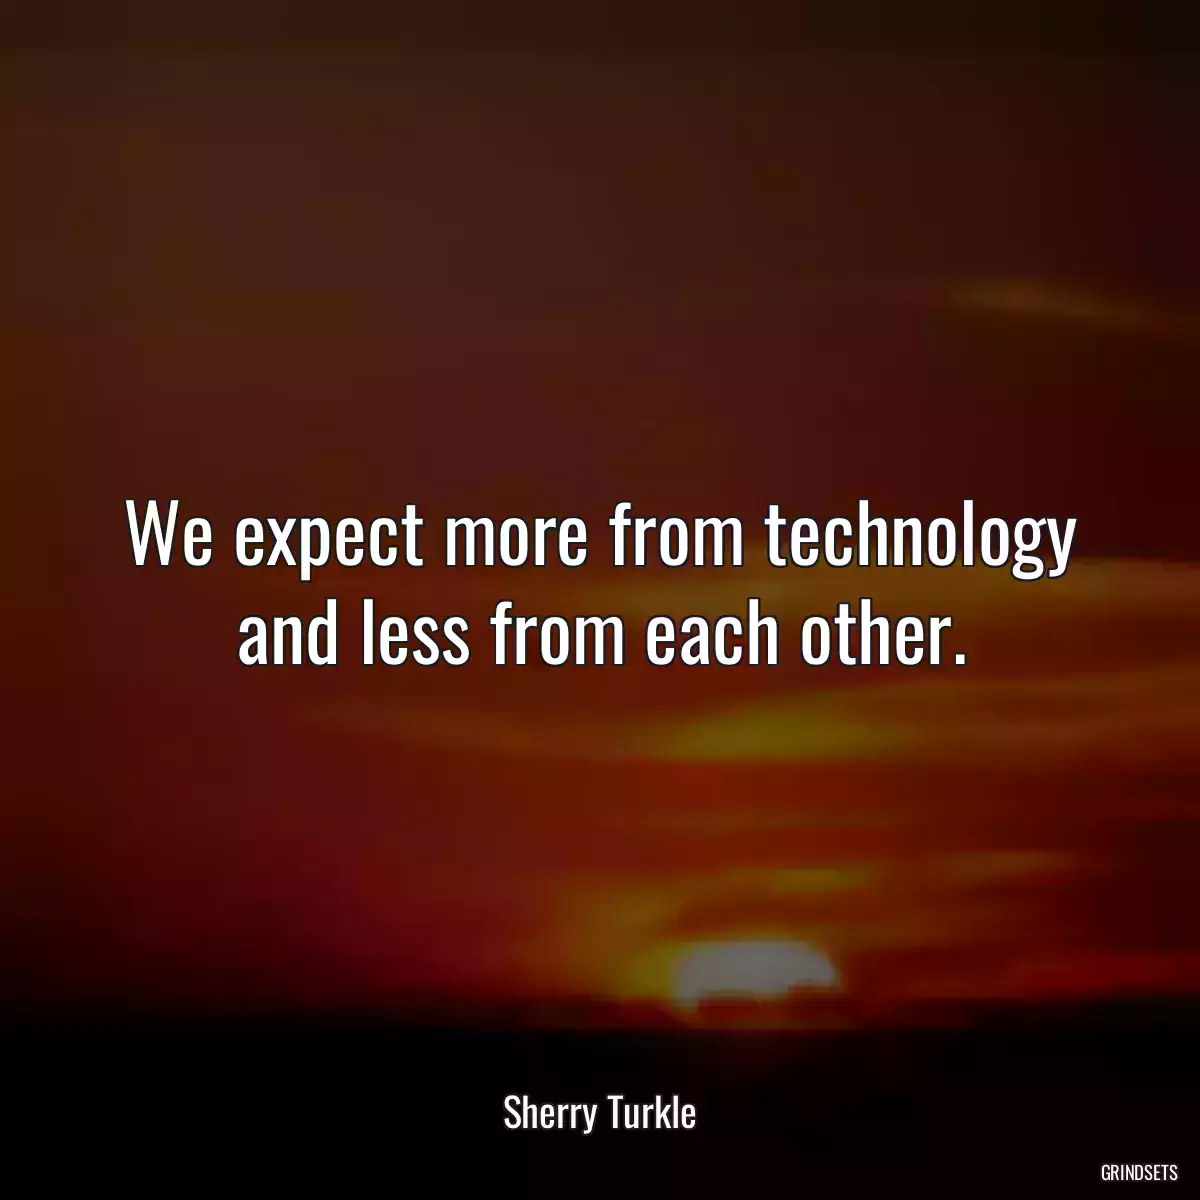 We expect more from technology and less from each other.